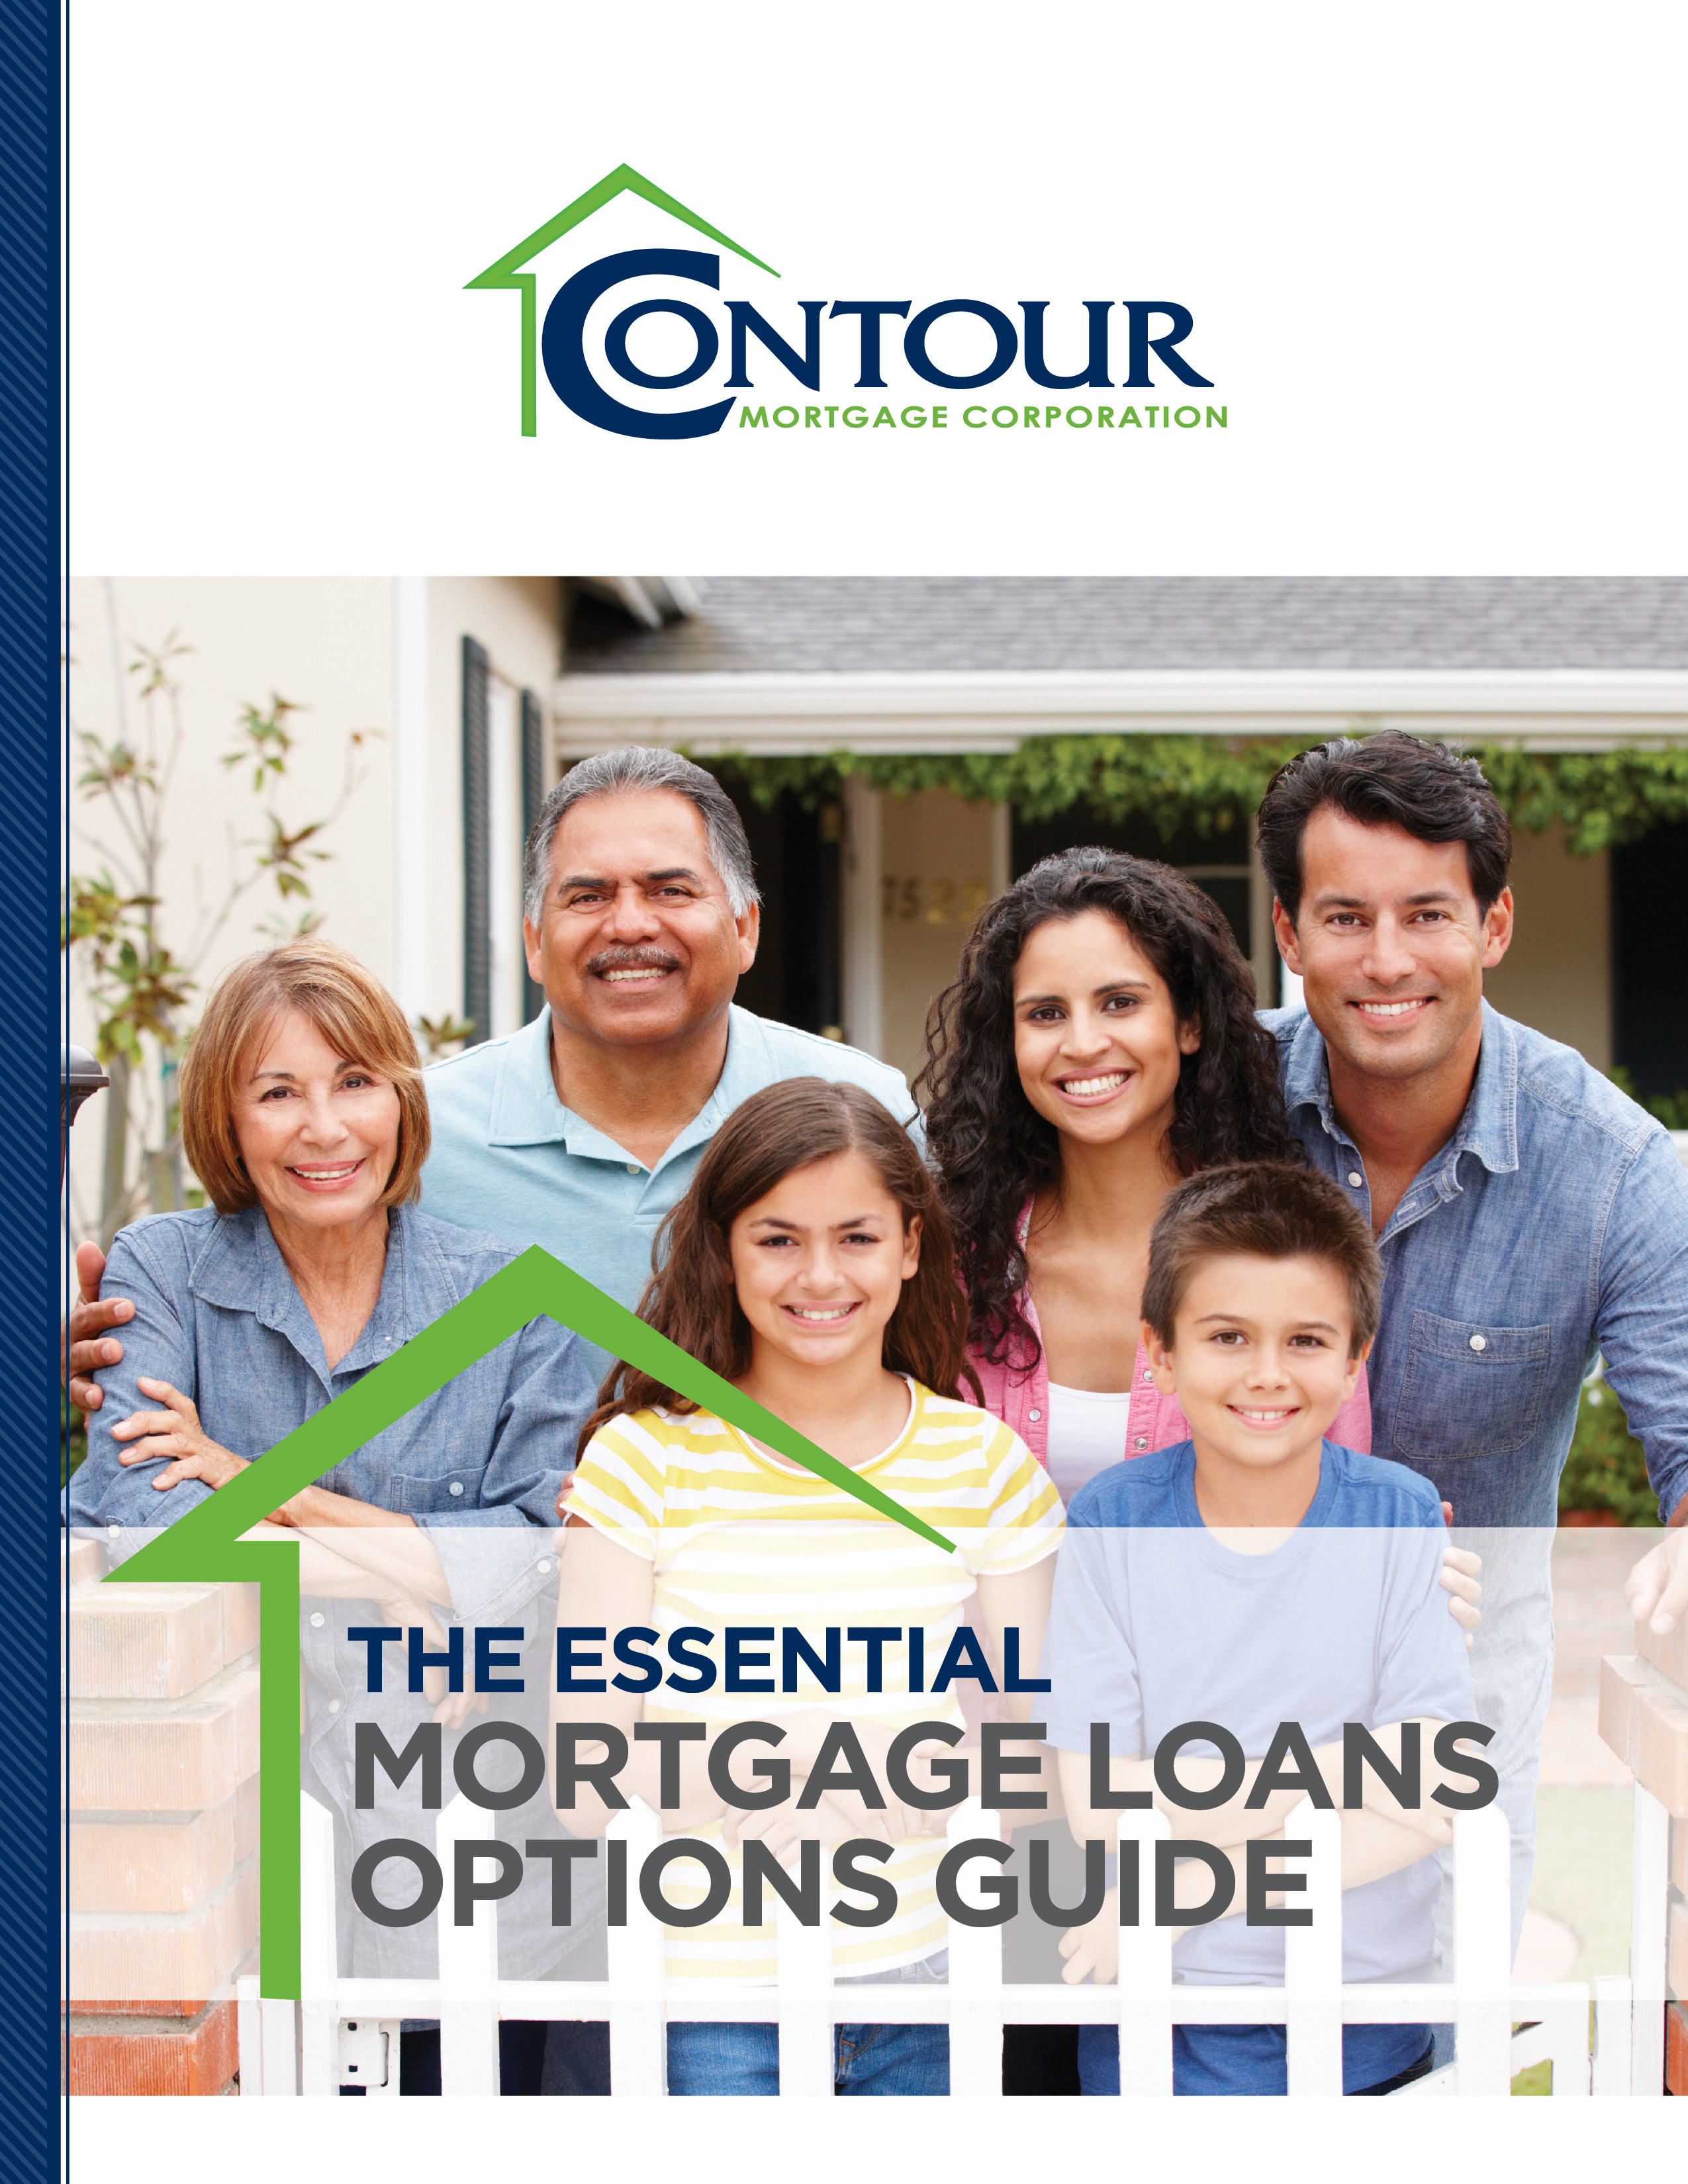 Contour Mortgage Loan Options Guide